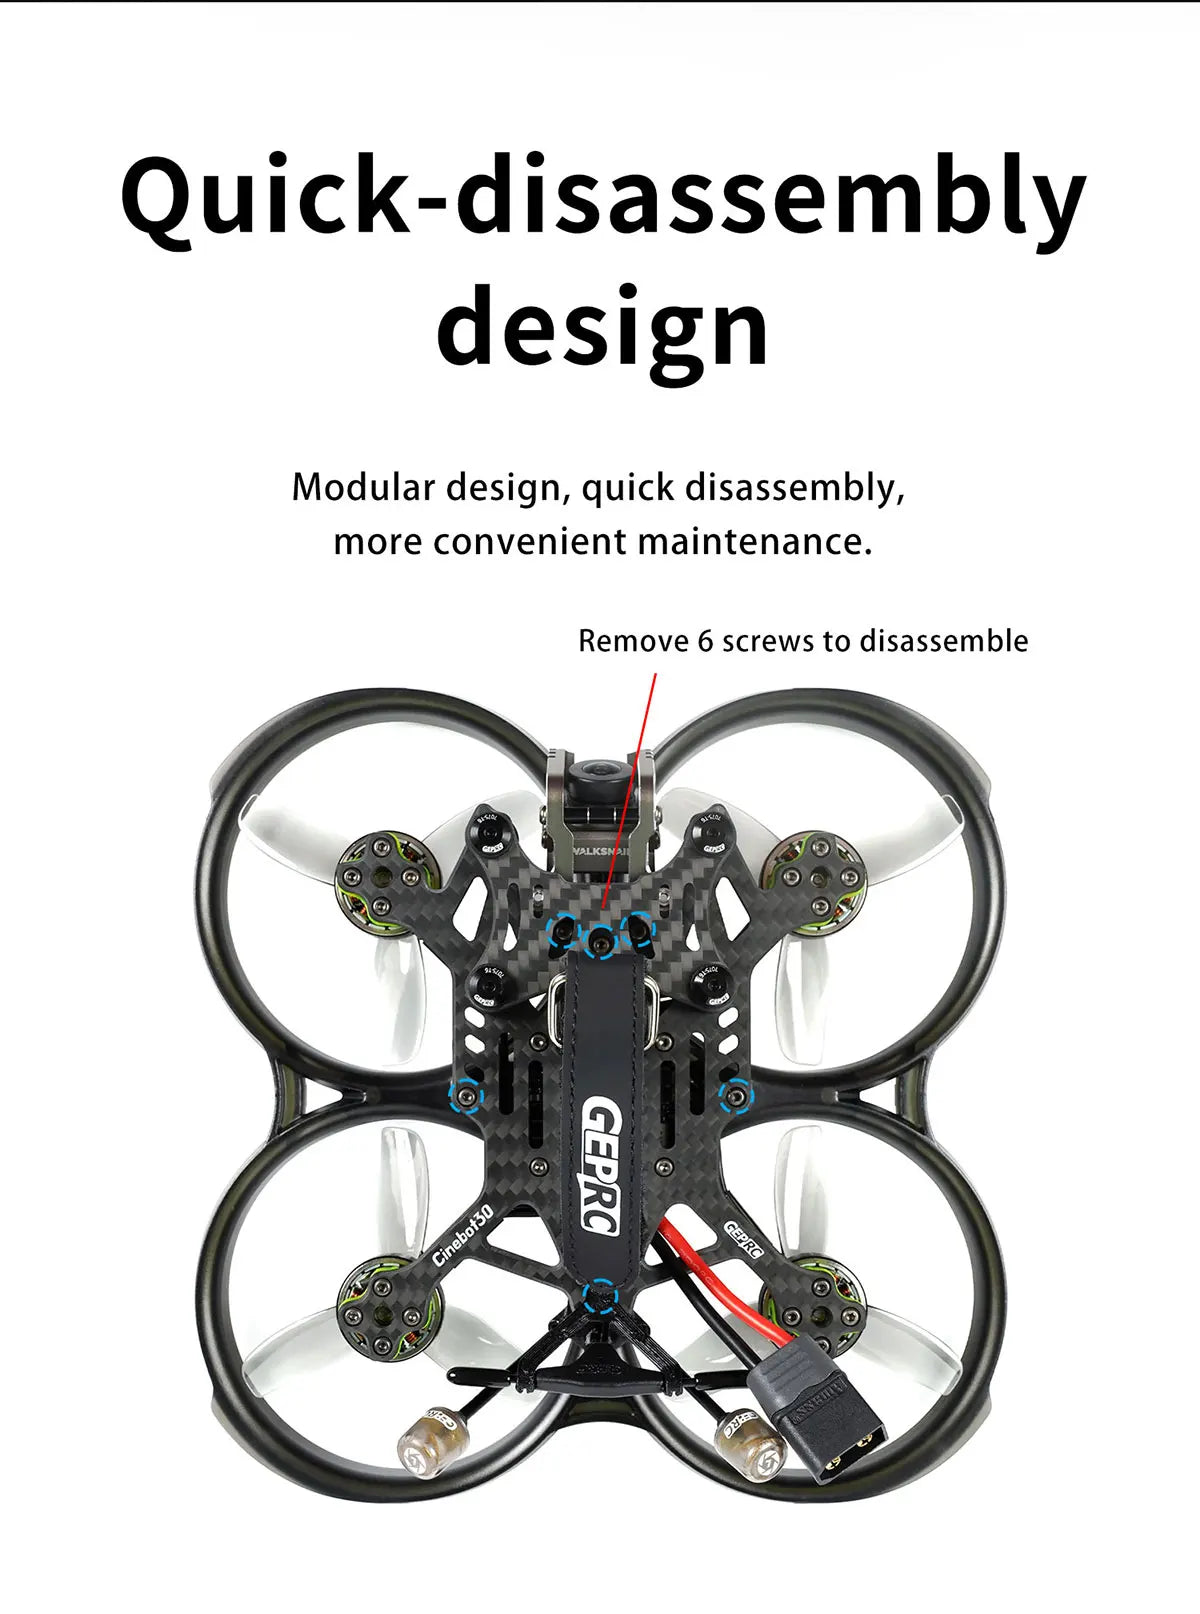 GEPRC Cinebot30 HD - Runcam Link Wasp 4S FPV, GEPRC Cinebot30 HD, Quick-disassembly design Cinebot3o easy to disassemble 